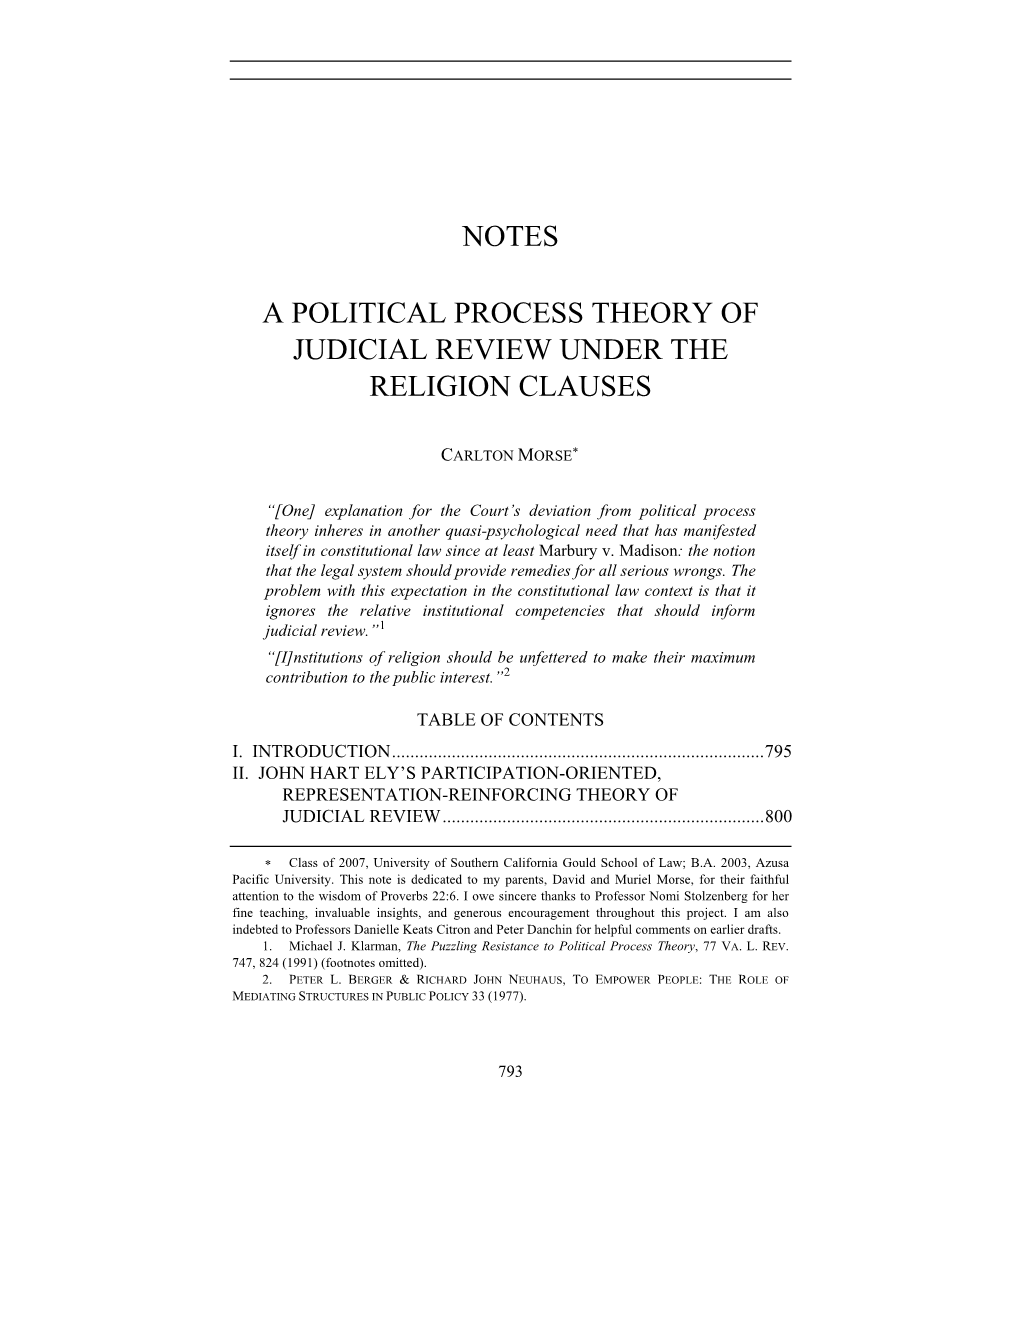 Notes a Political Process Theory of Judicial Review Under the Religion